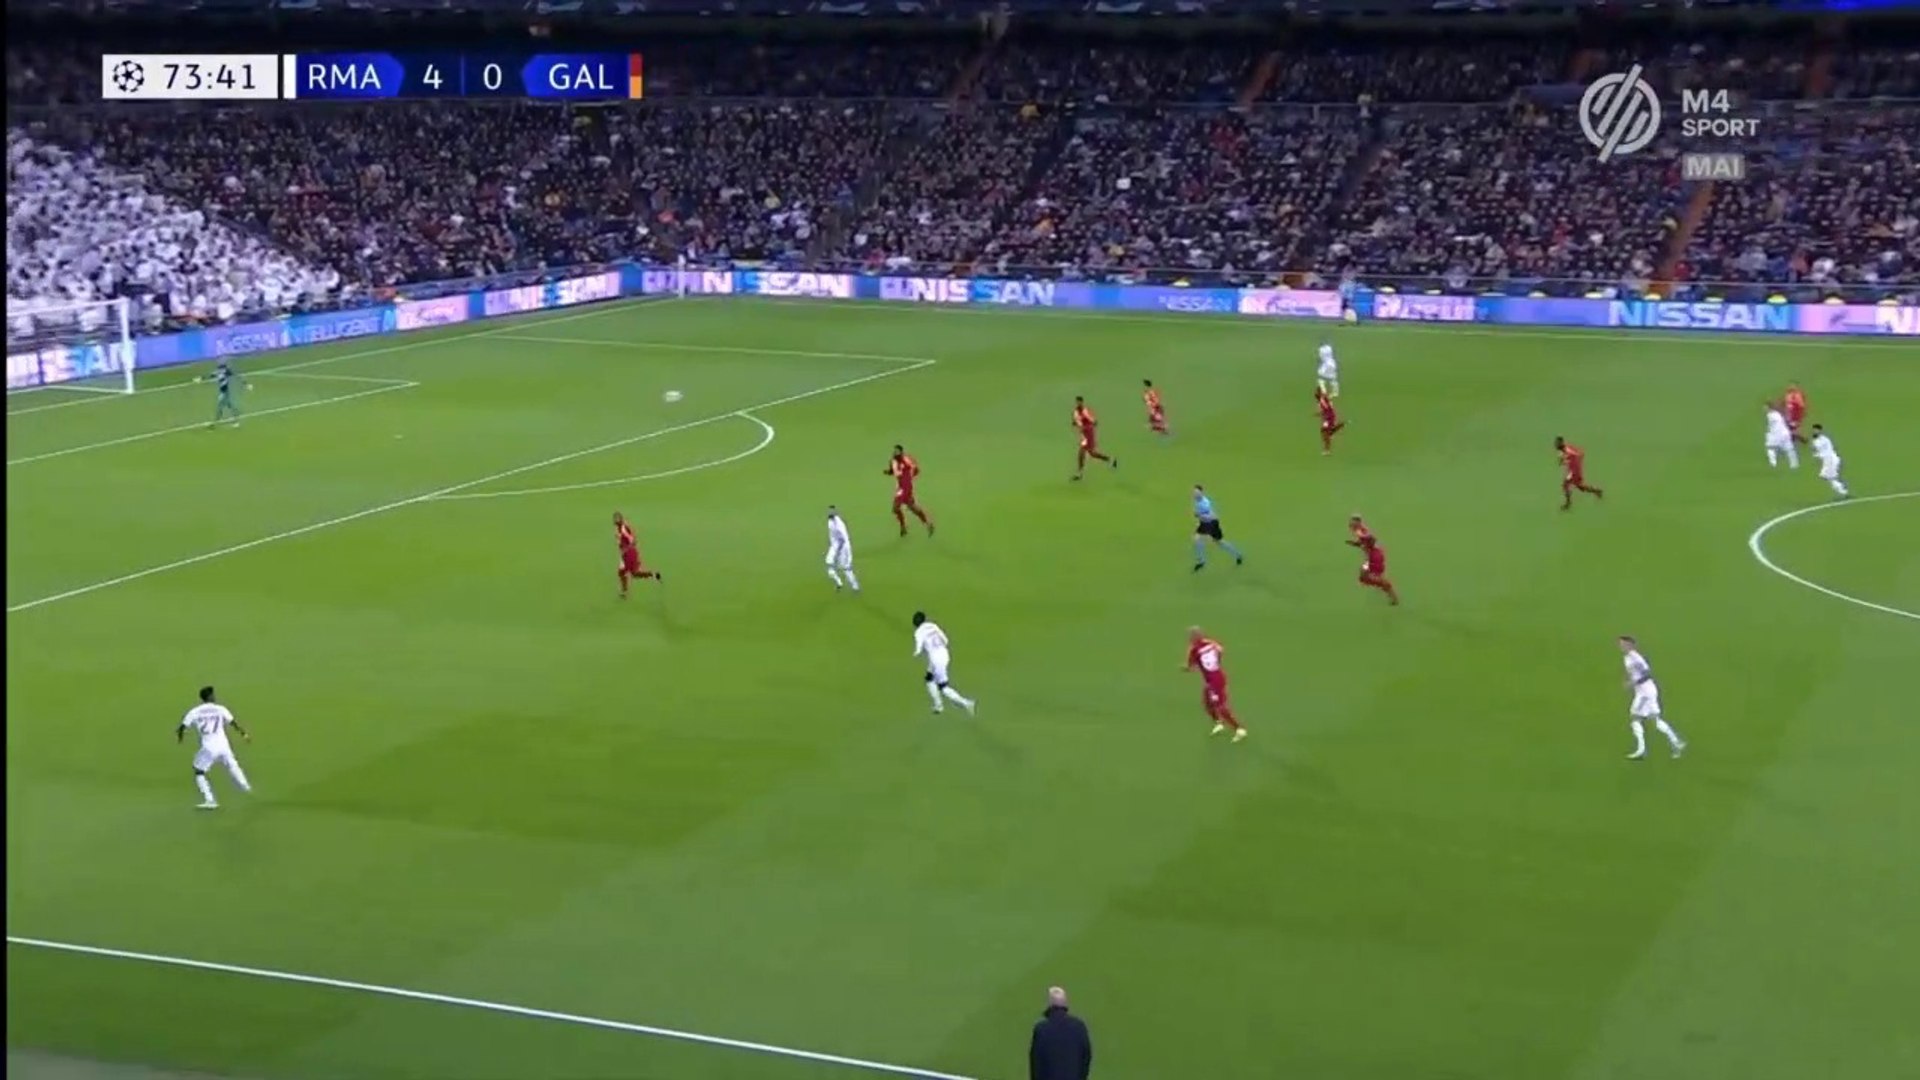 UEFA Champions League (Groups A, B, C, D, 4. round) - All Highlights, 06.11. 2019. HD - video Dailymotion